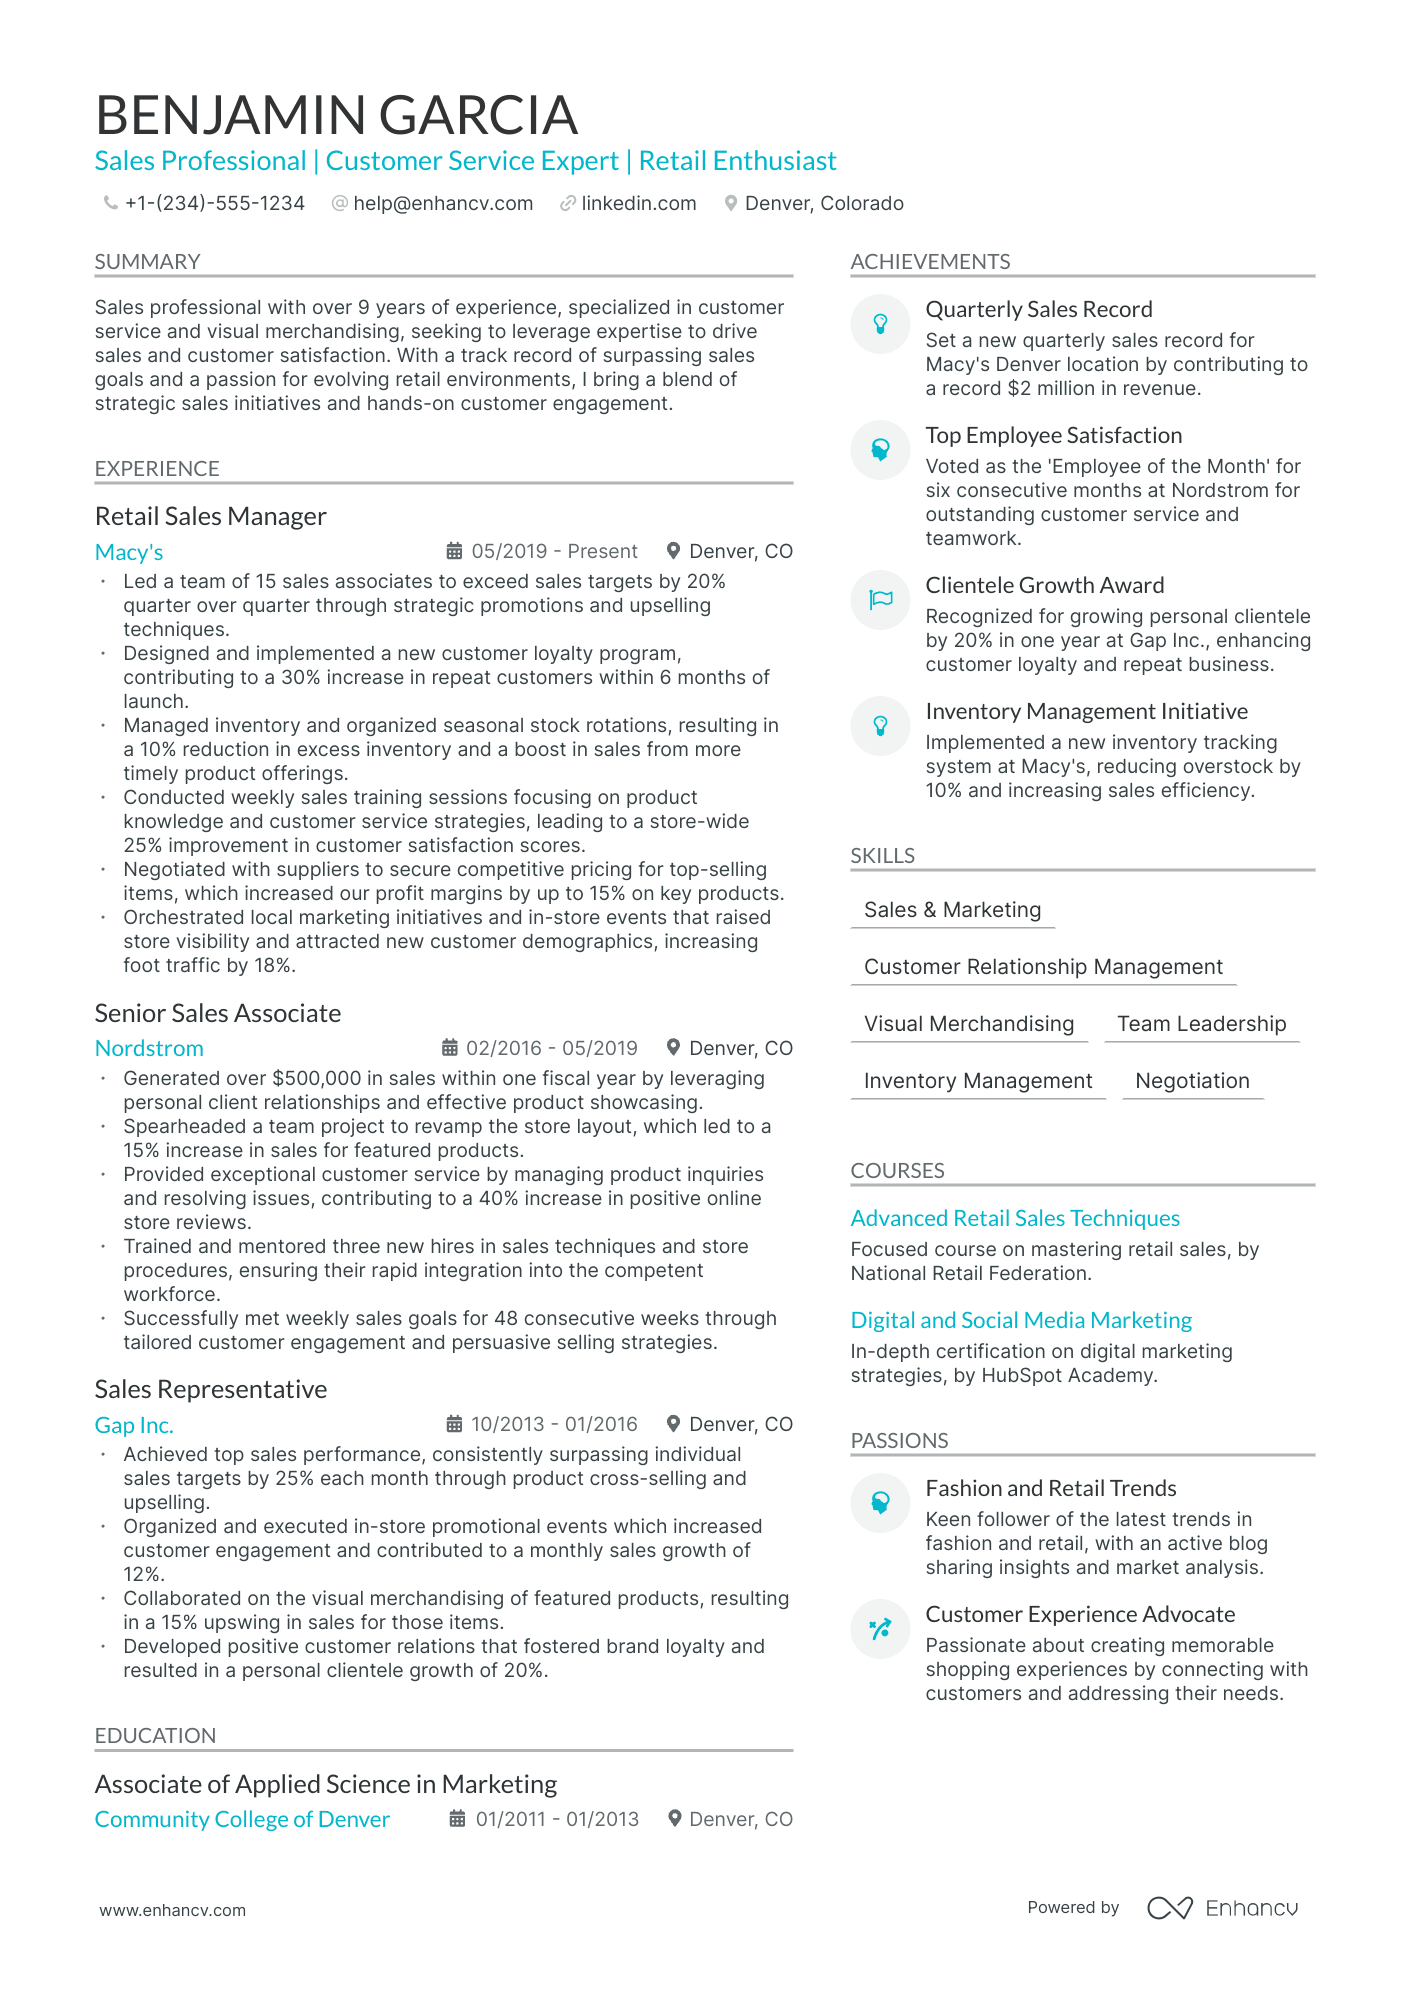 example of resume applying for sales lady